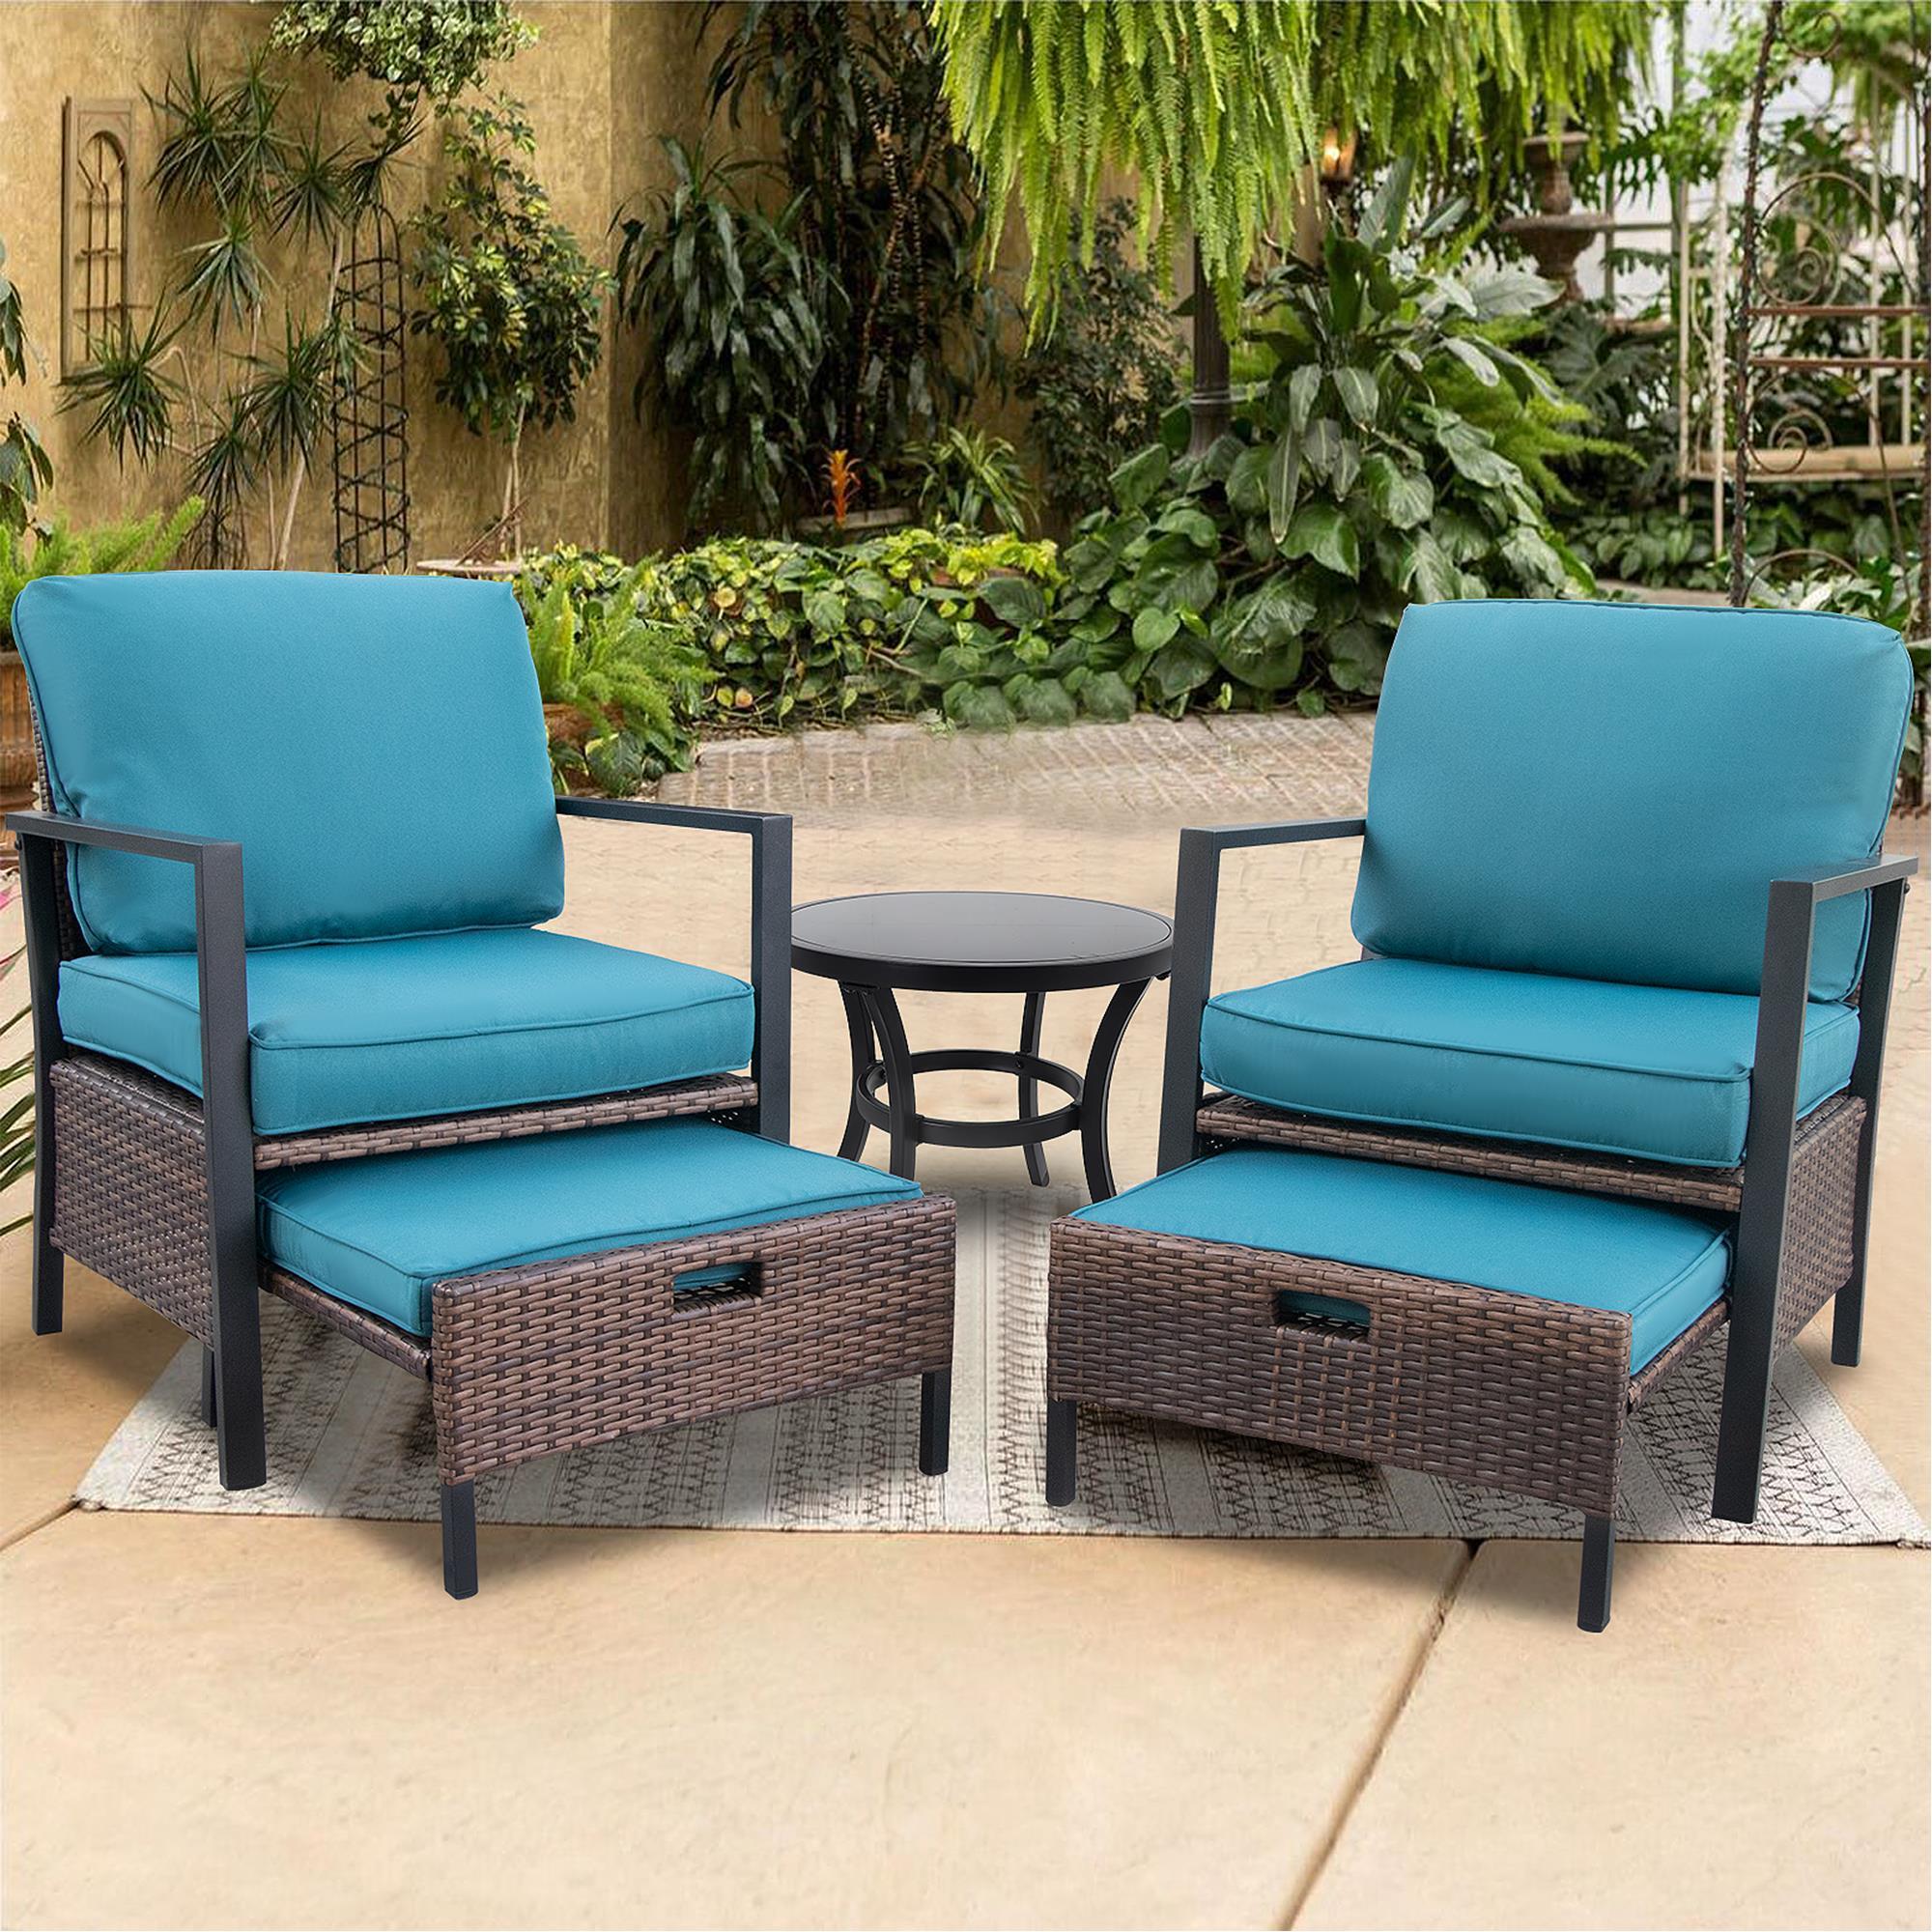 UBesGoo 5 PCS Luxury Patio Conversation Set with Ottoman,Outdoor Wicker Rattan Furniture Set,Comfortable Lounge Chair with Glass Top Side Table,Balcony,Backyard,Poolside,Garden Decor (Blue) - image 4 of 9